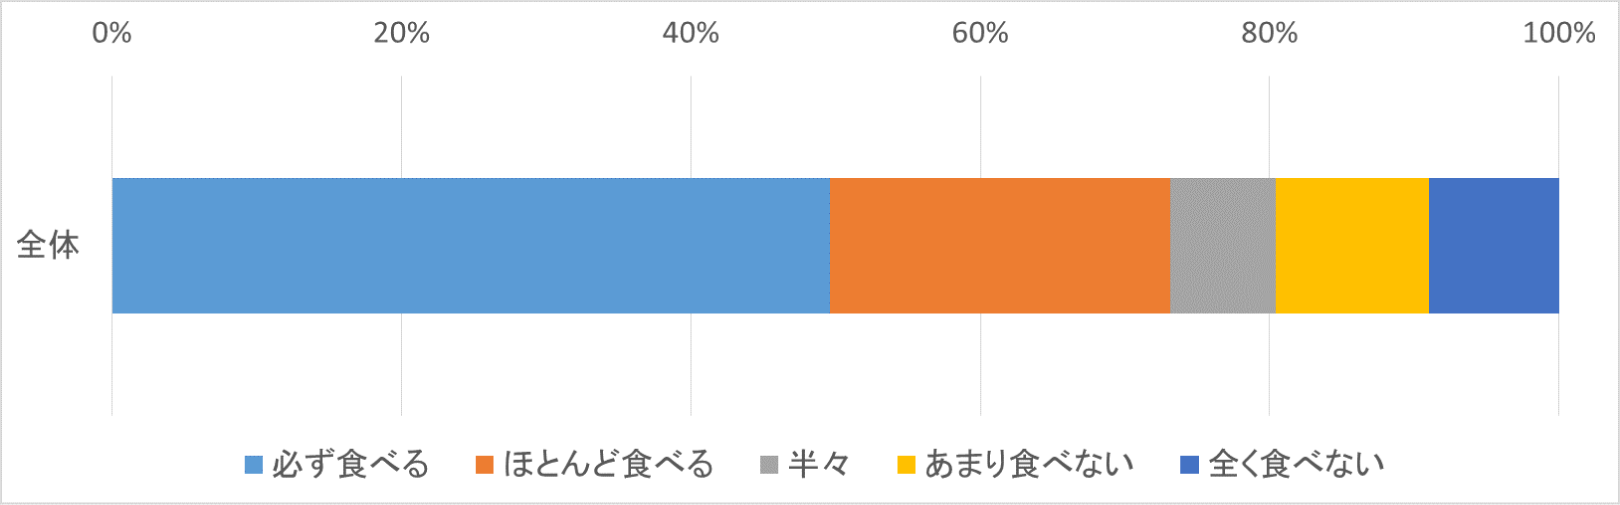 201809-03-fig-01.png